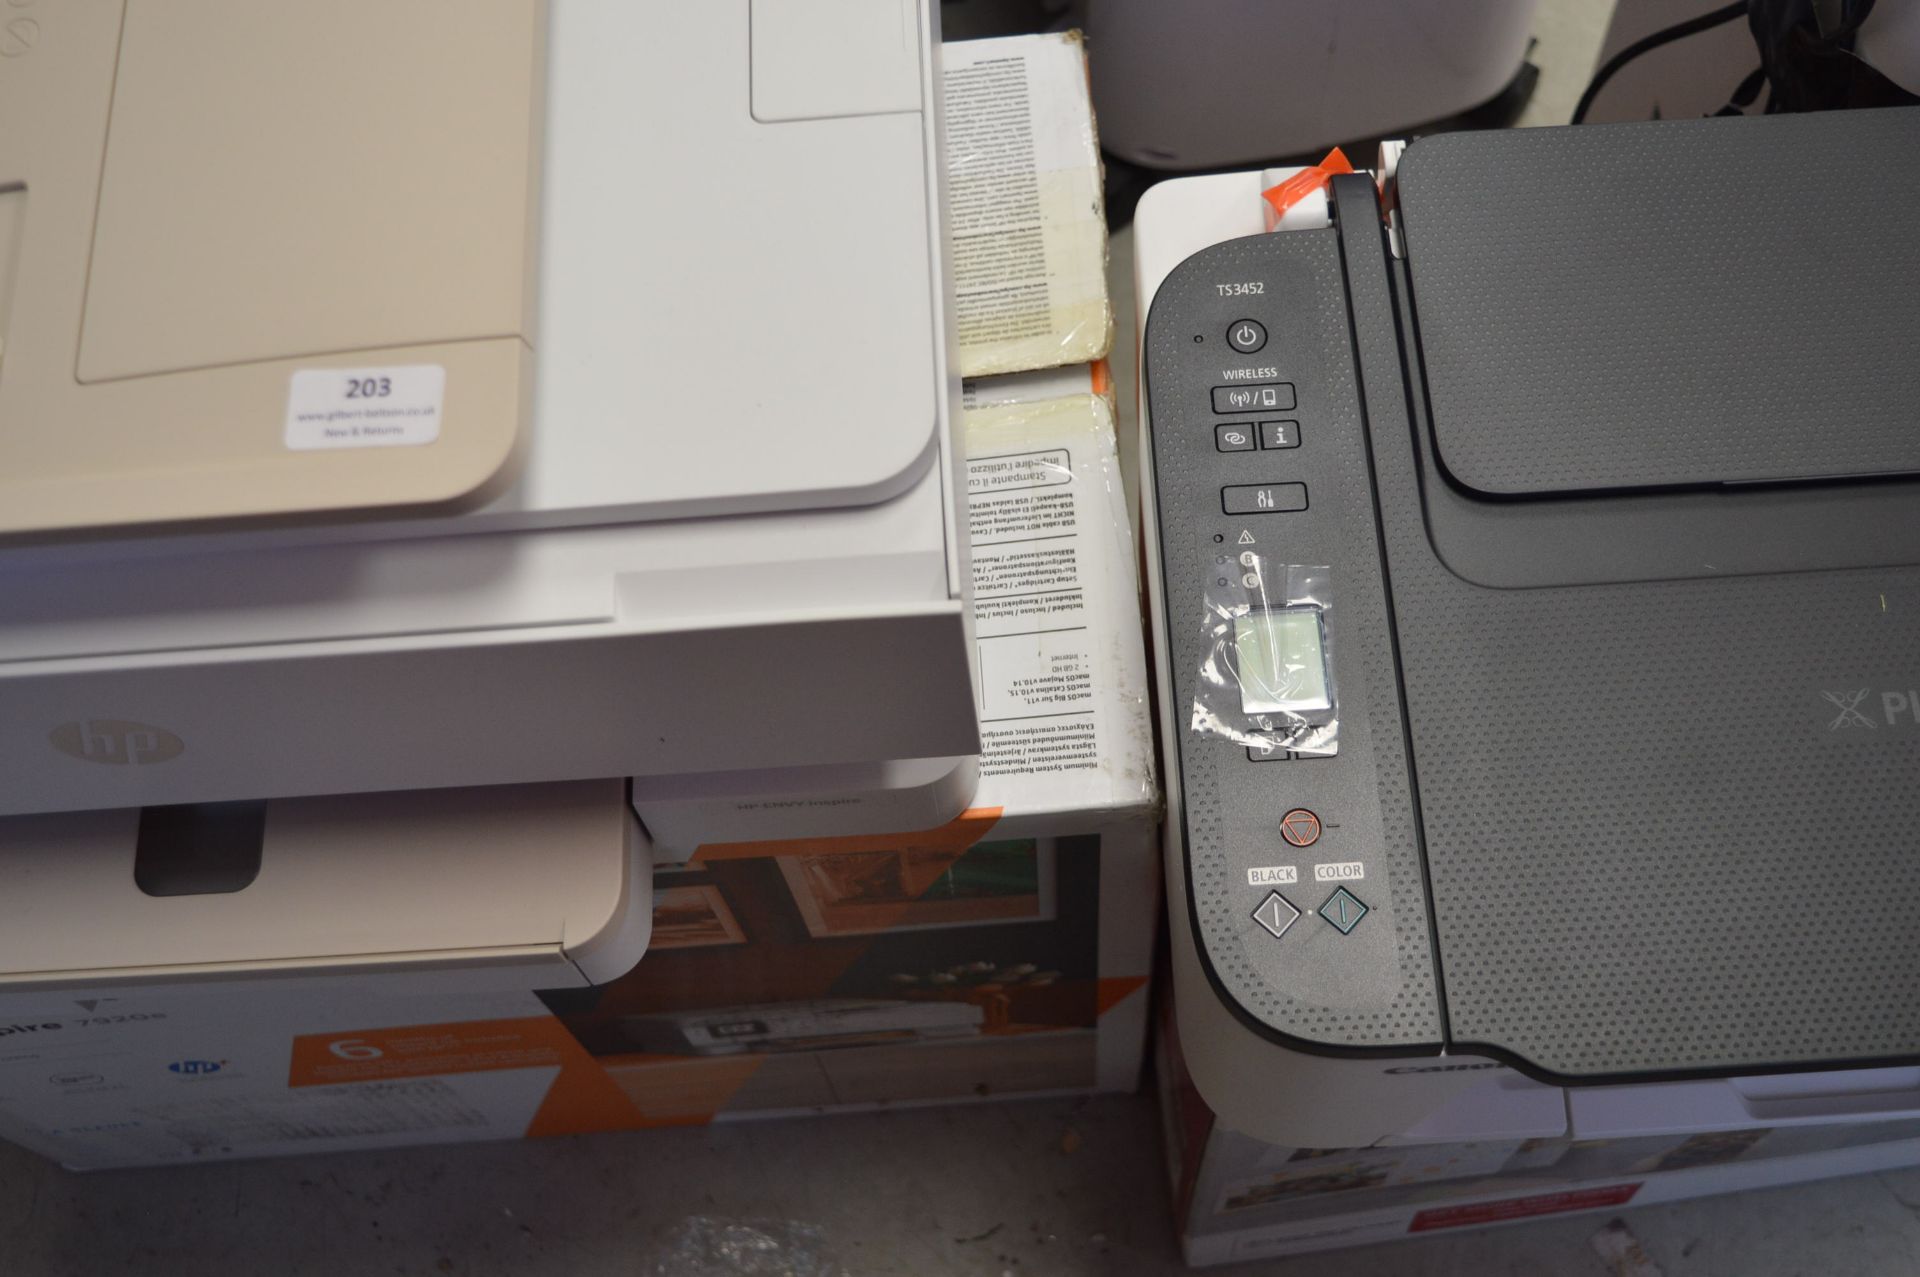 *HP Envy Inspire and Canon TS3452 Printers - Image 2 of 2